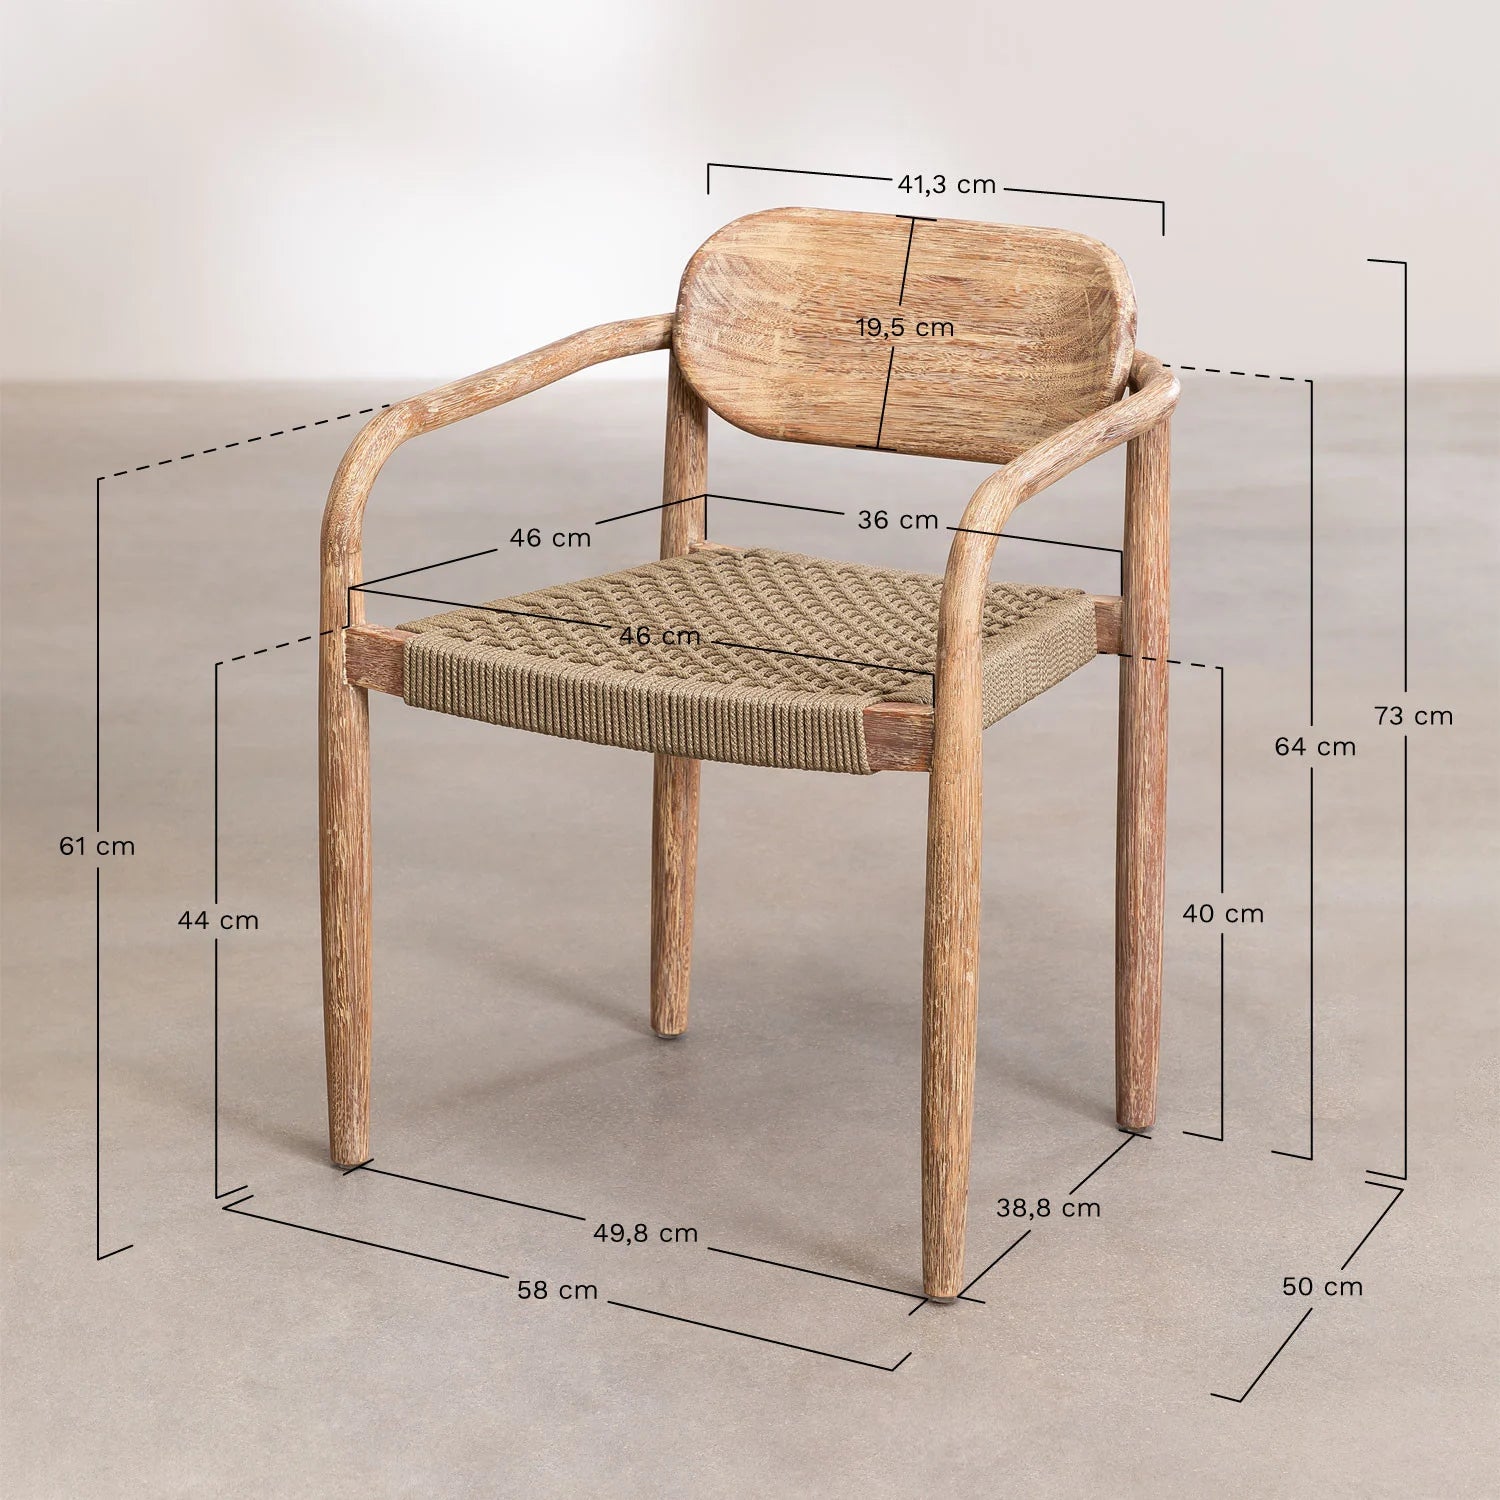 CLIFTON Garden chair (can be accompanied with a CLIFTON table)